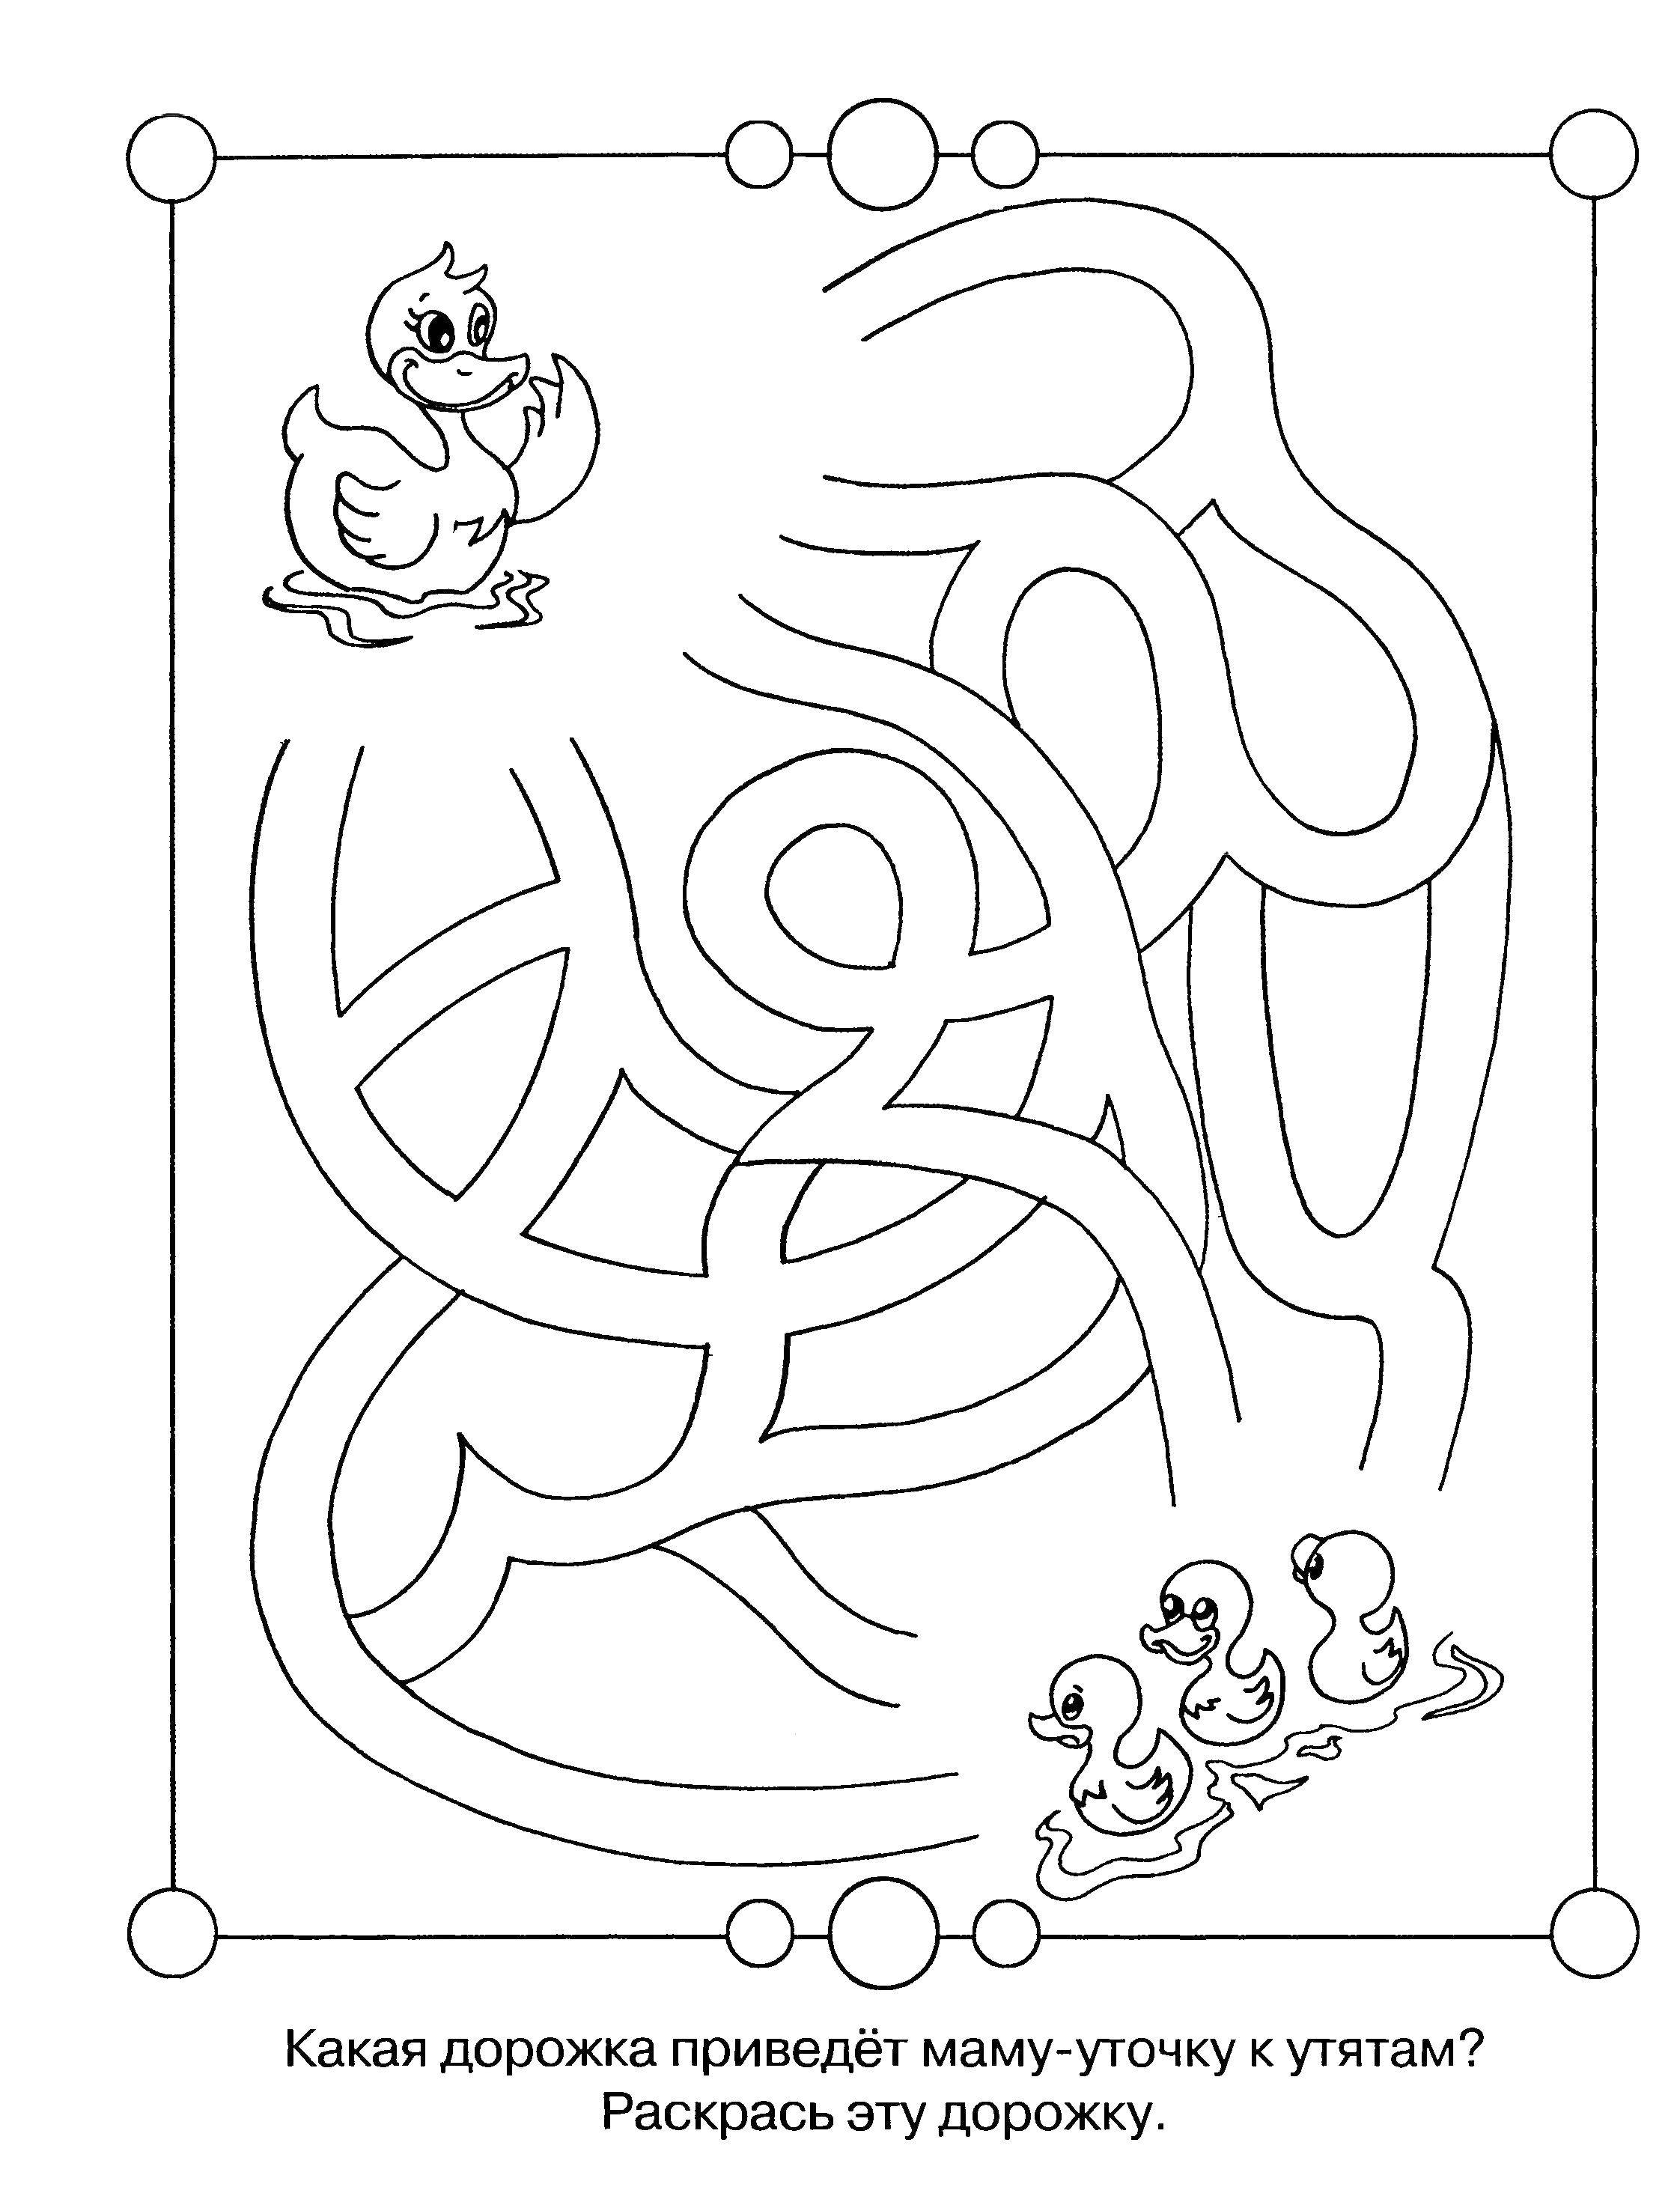 Coloring Go through the maze to the ducklings. Category riddles for kids. Tags:  Teaching coloring, logic.